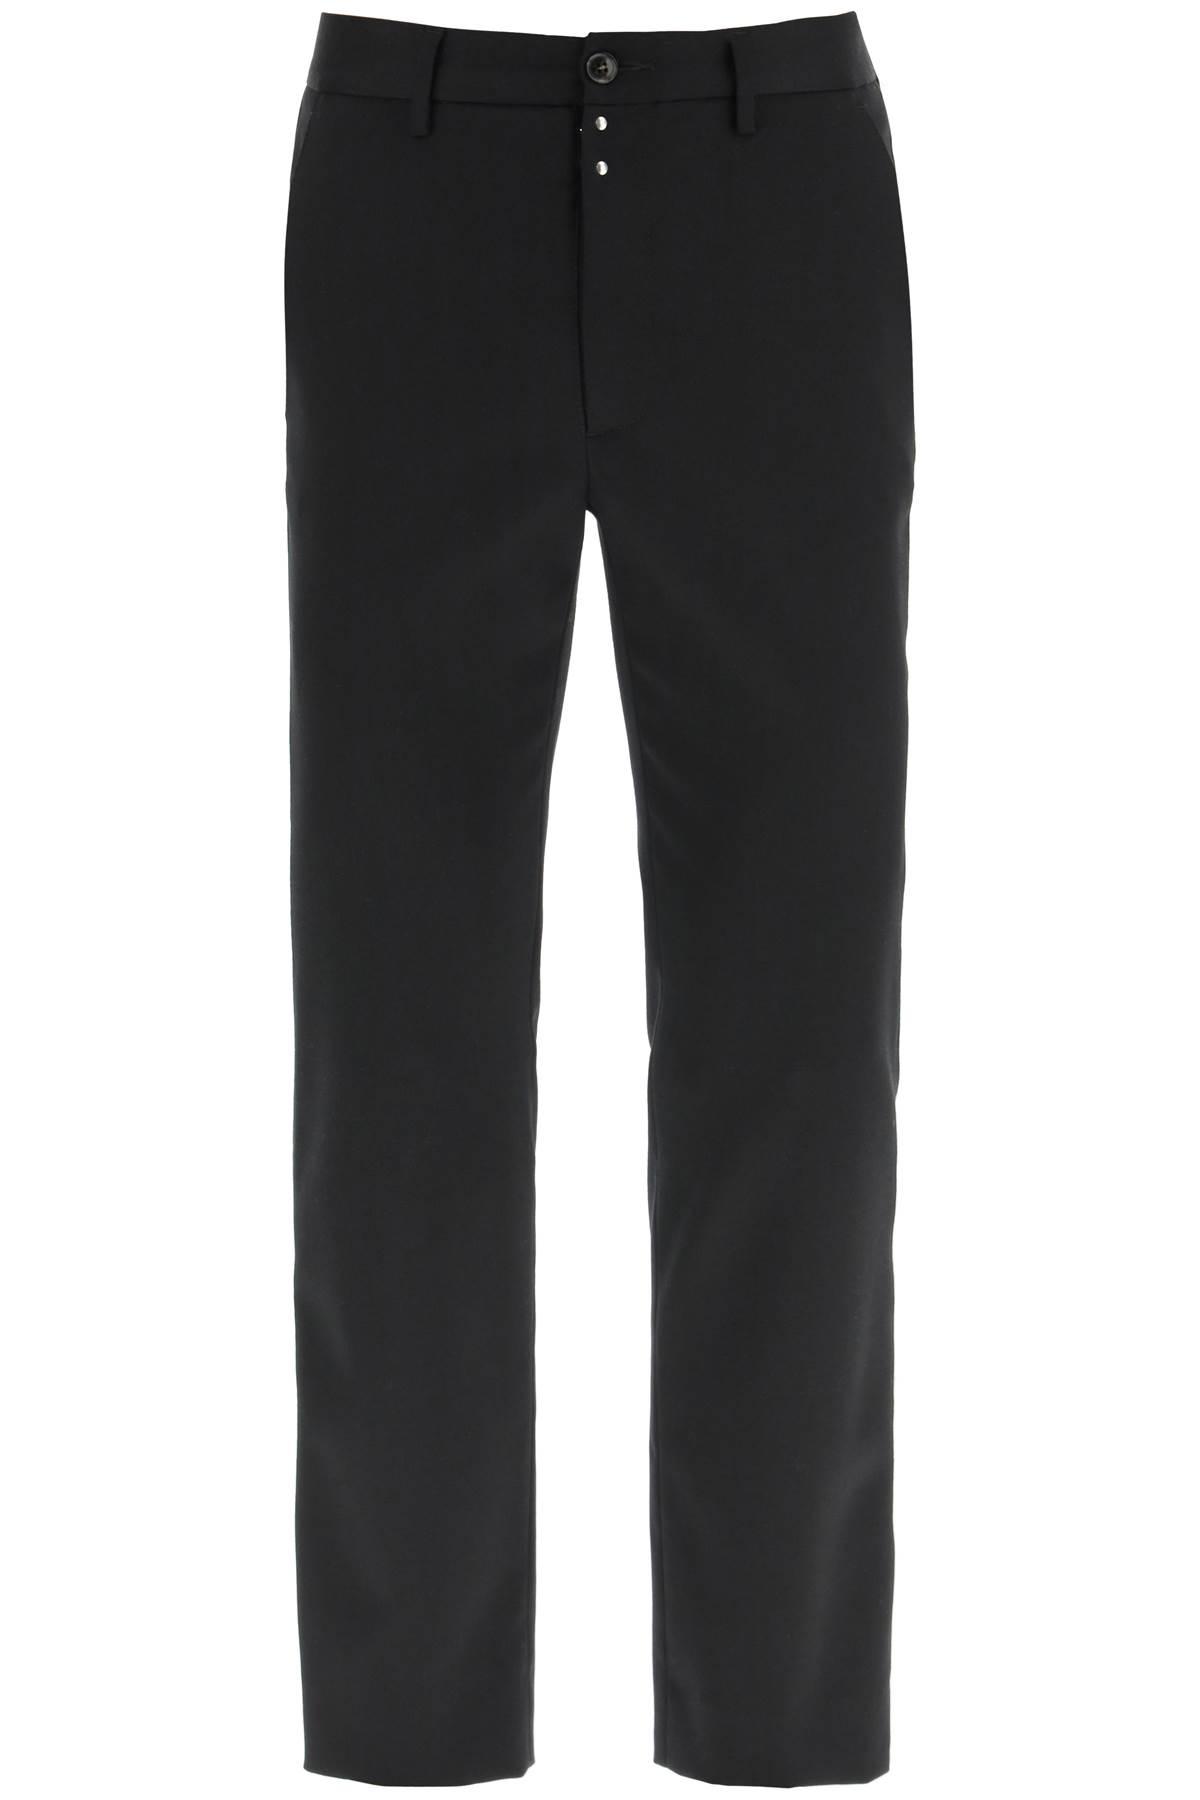 MM6 MAISON MARGIELA STRETCH WOOL BLEND TAILORED TROUSERS